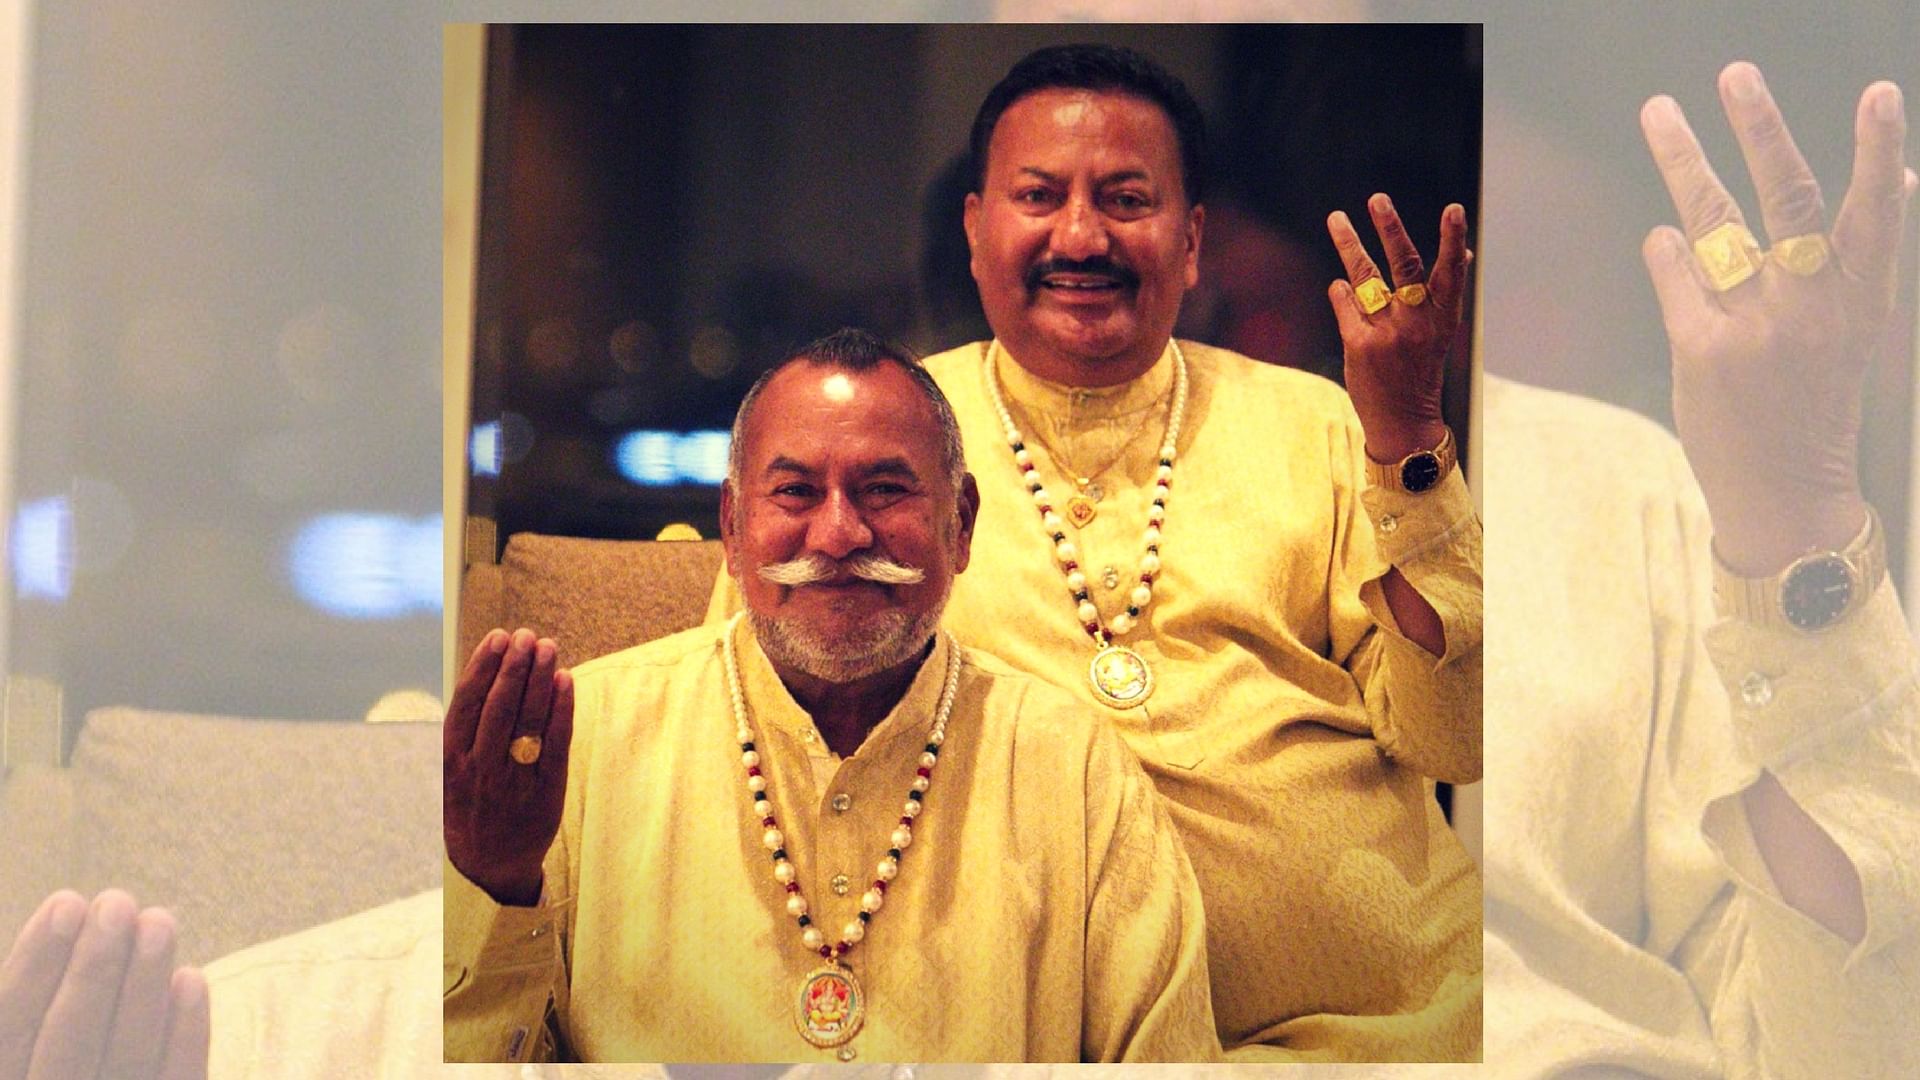 The Wadali brothers have&nbsp; made stellar contribution to Indian classical music.&nbsp;